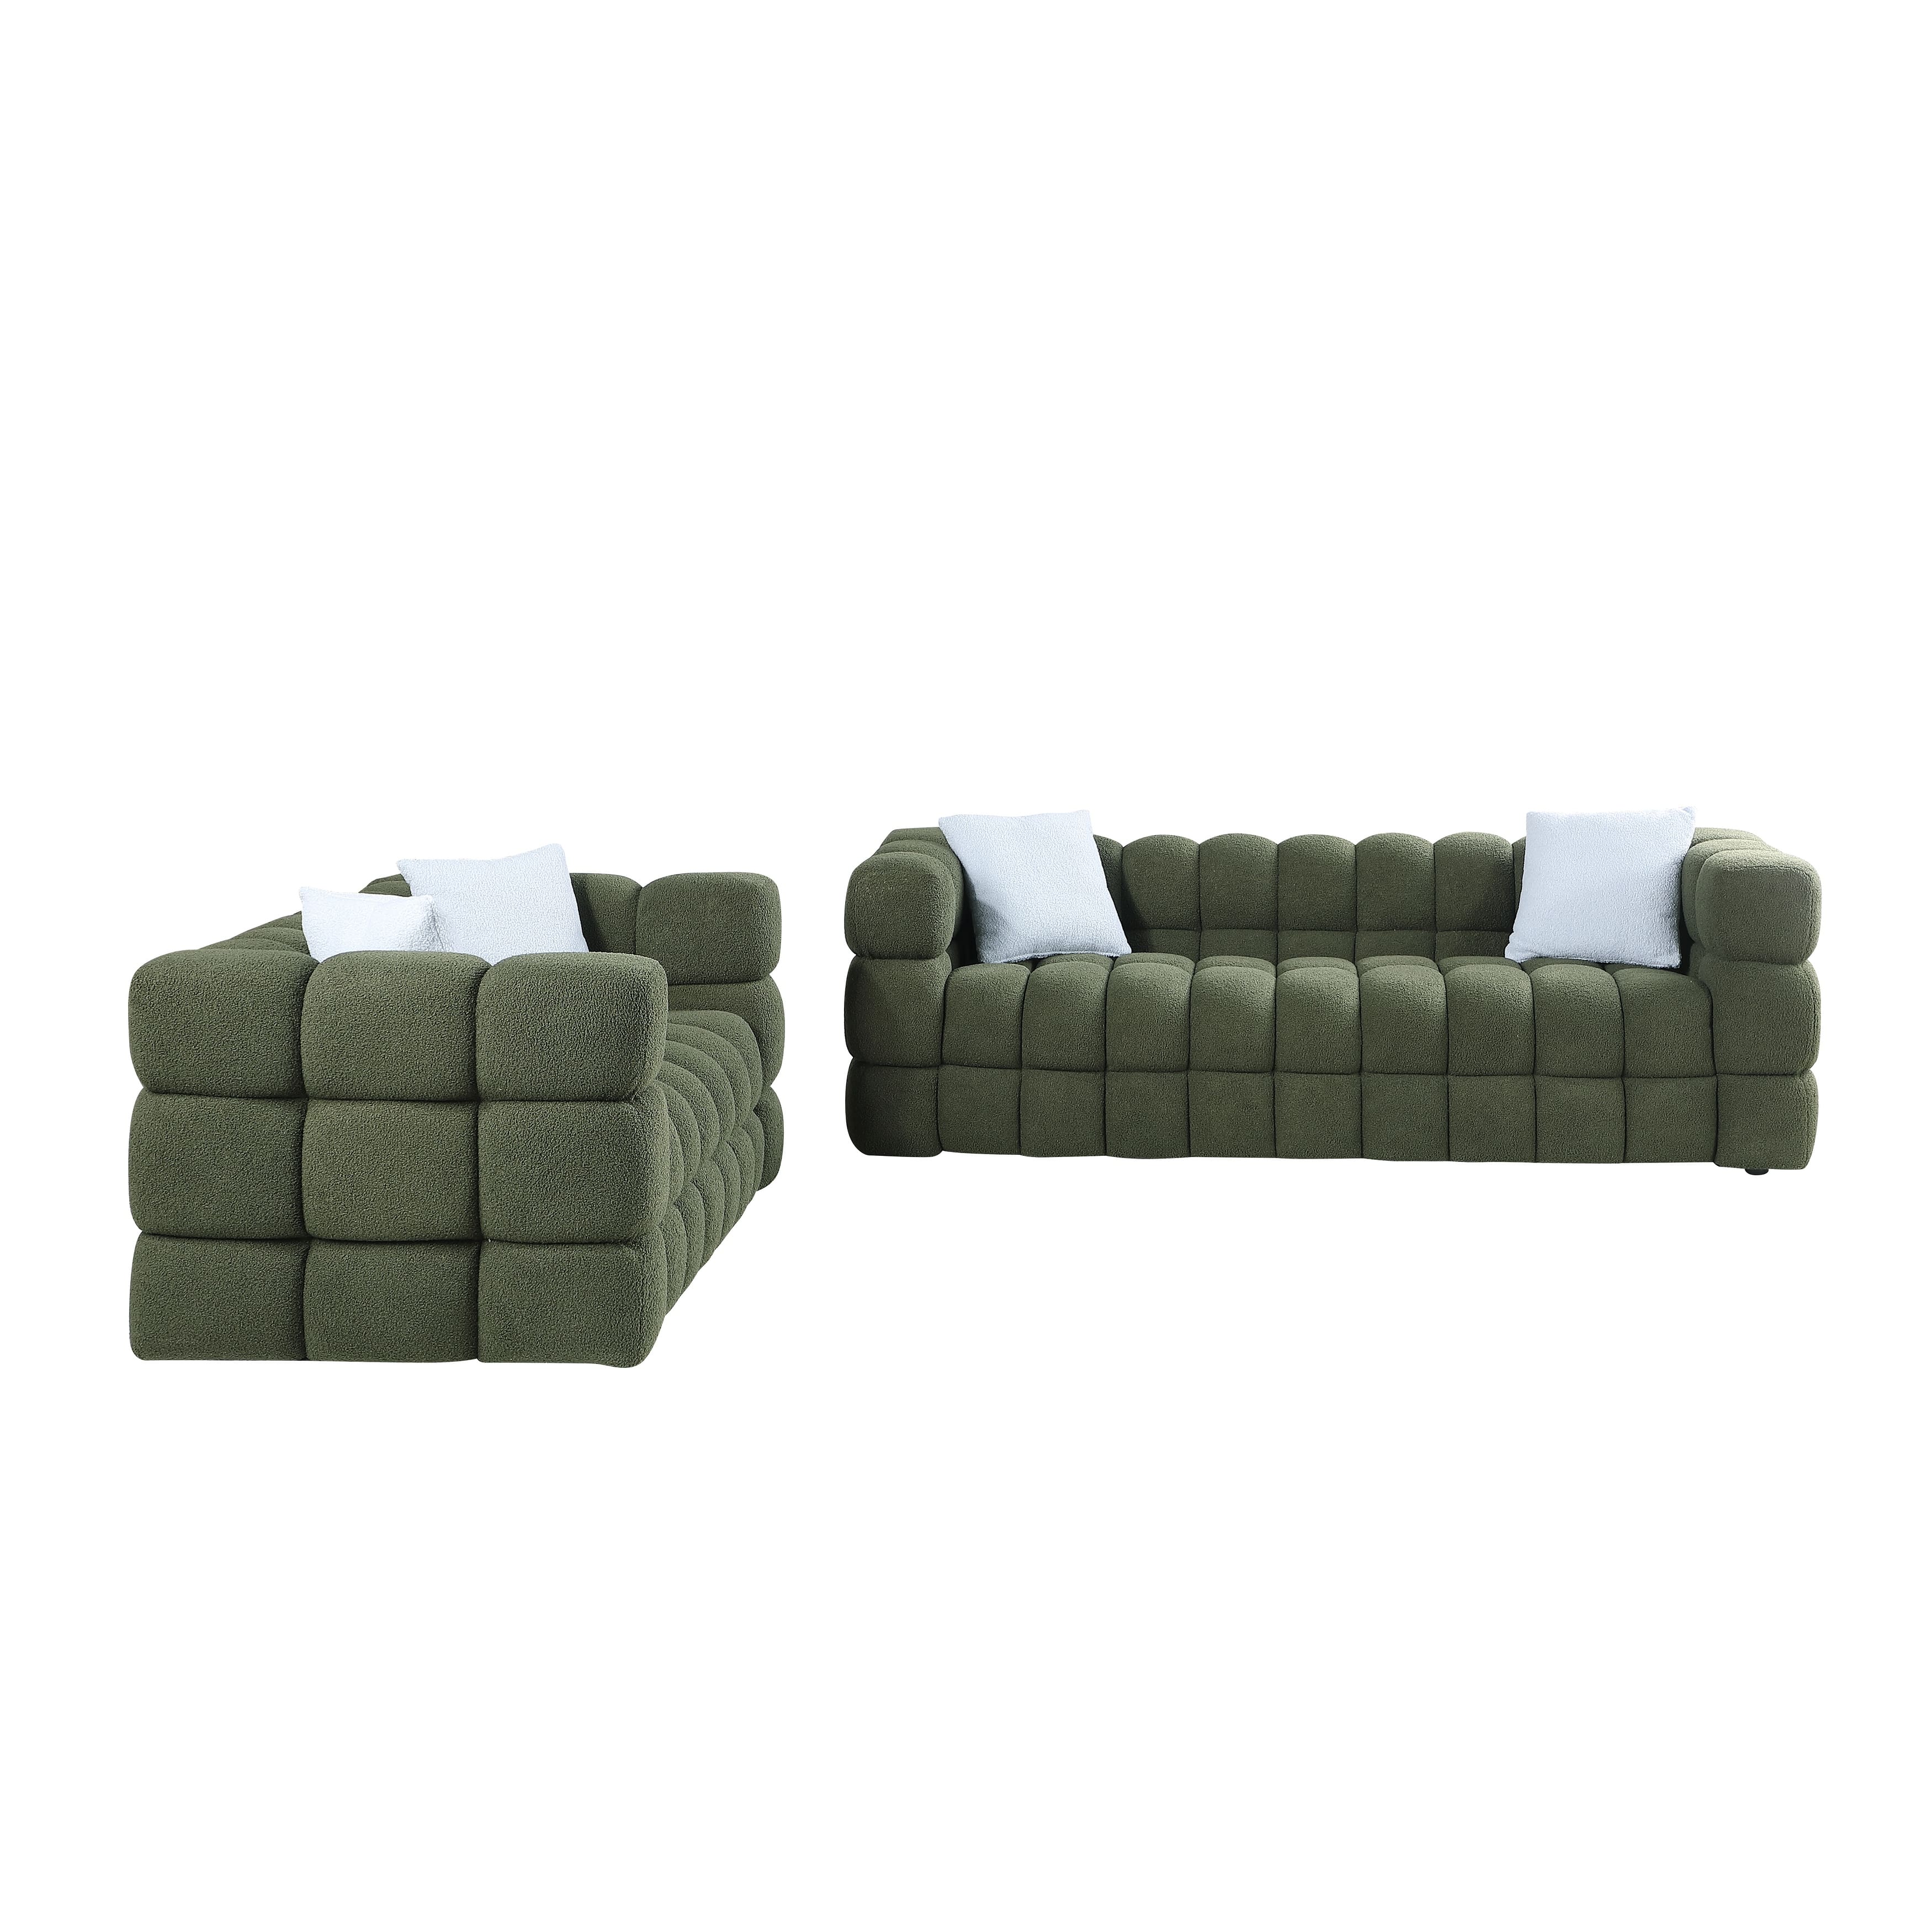 Living Room Deep Seat Olive Green Boucle 2pc Sofa Sets w/ Pillows - 2+3 ...